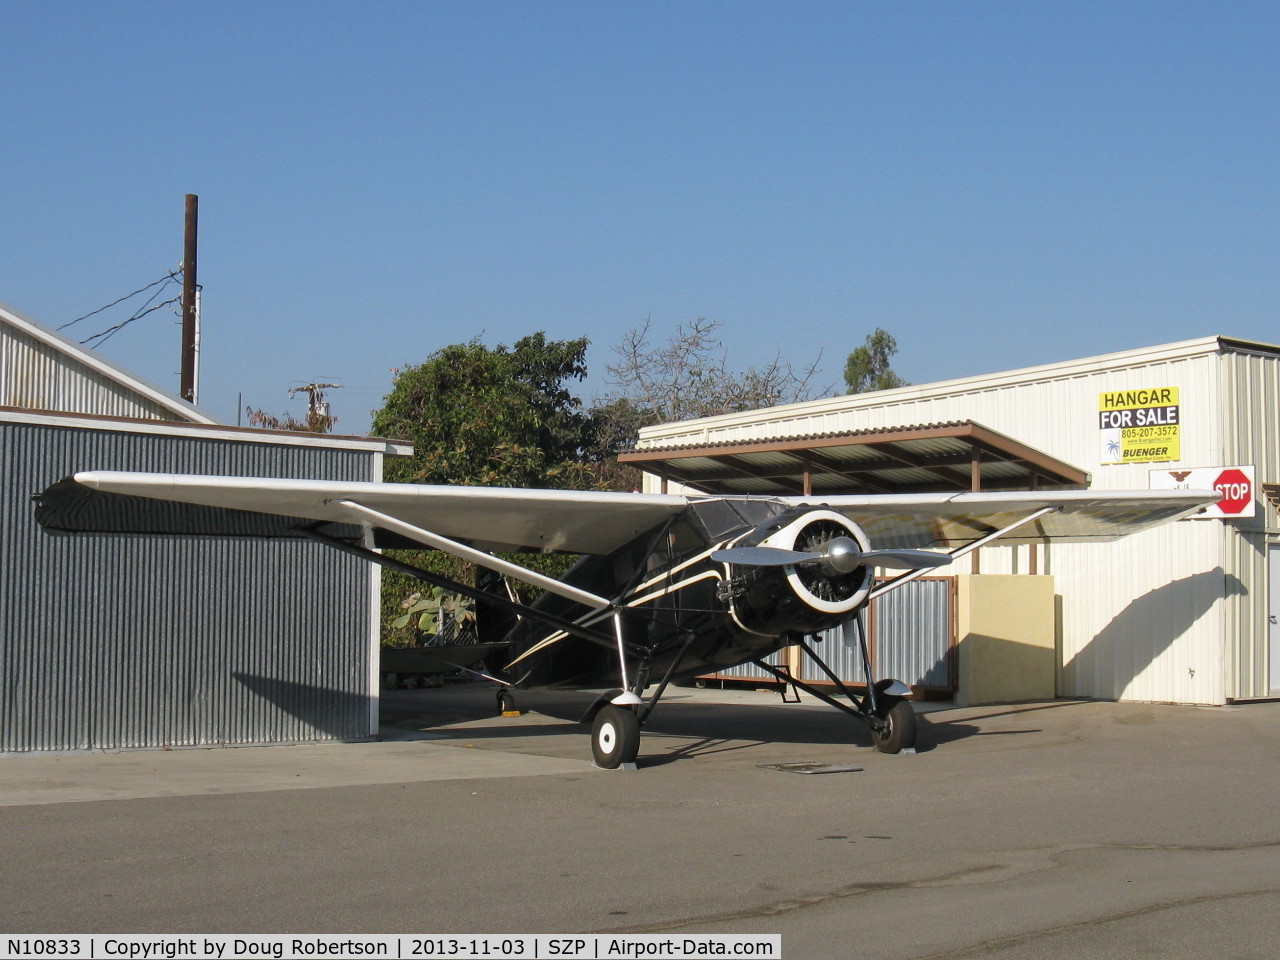 N10833, 1931 Stinson JR. S C/N 8027, 1931 Stinson JUNIOR S, Lycoming R680E 9 cylinder 215 Hp radial, a signature aircraft of the Aviation Museum of Santa Paula courtesy donation by Clay Lacy. Thank you, Clay!